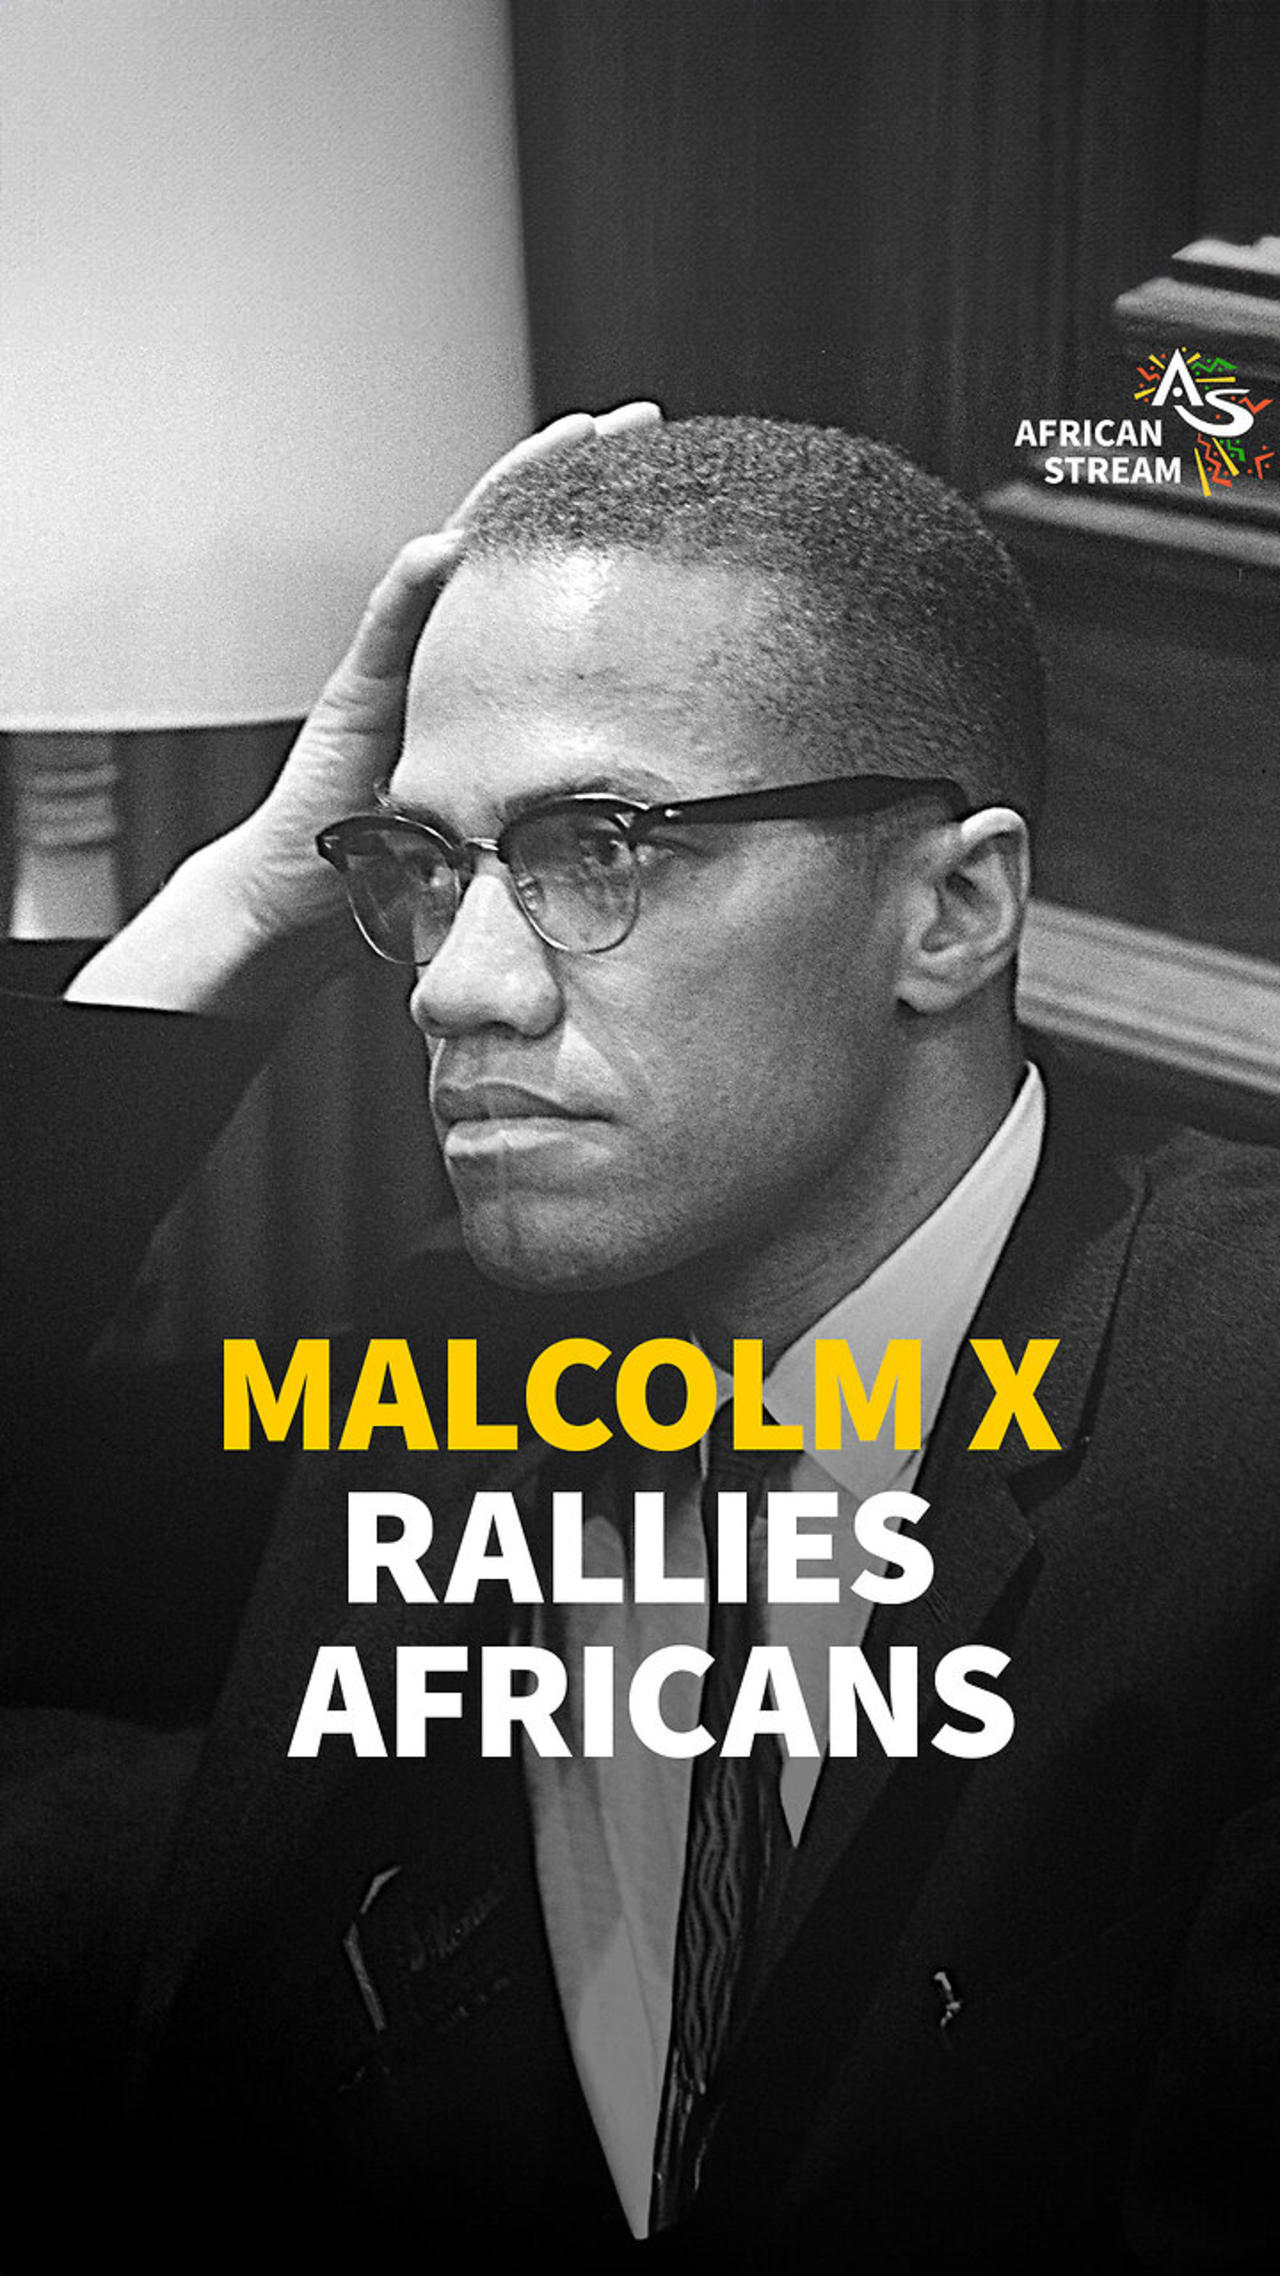 MALCOLM X RALLIES AFRICANS